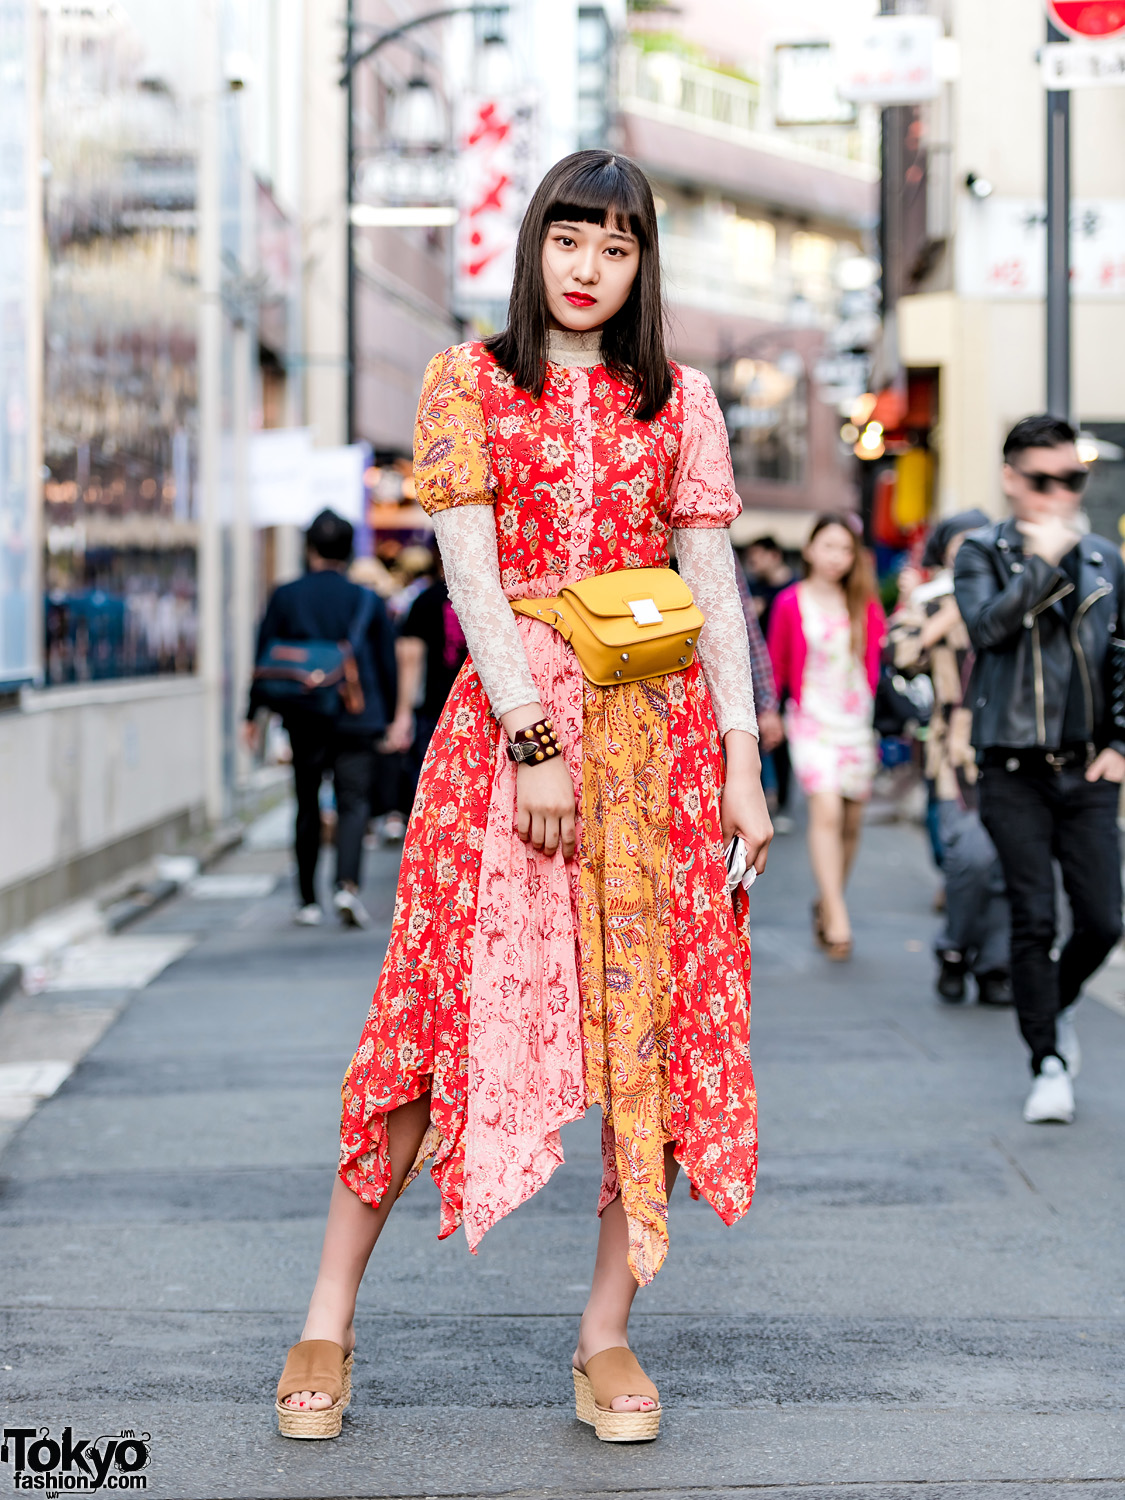 Japanese Teen Model & Actress in Harajuku w/ Floral Dress, Toga Suede Wedges & Waist Bag